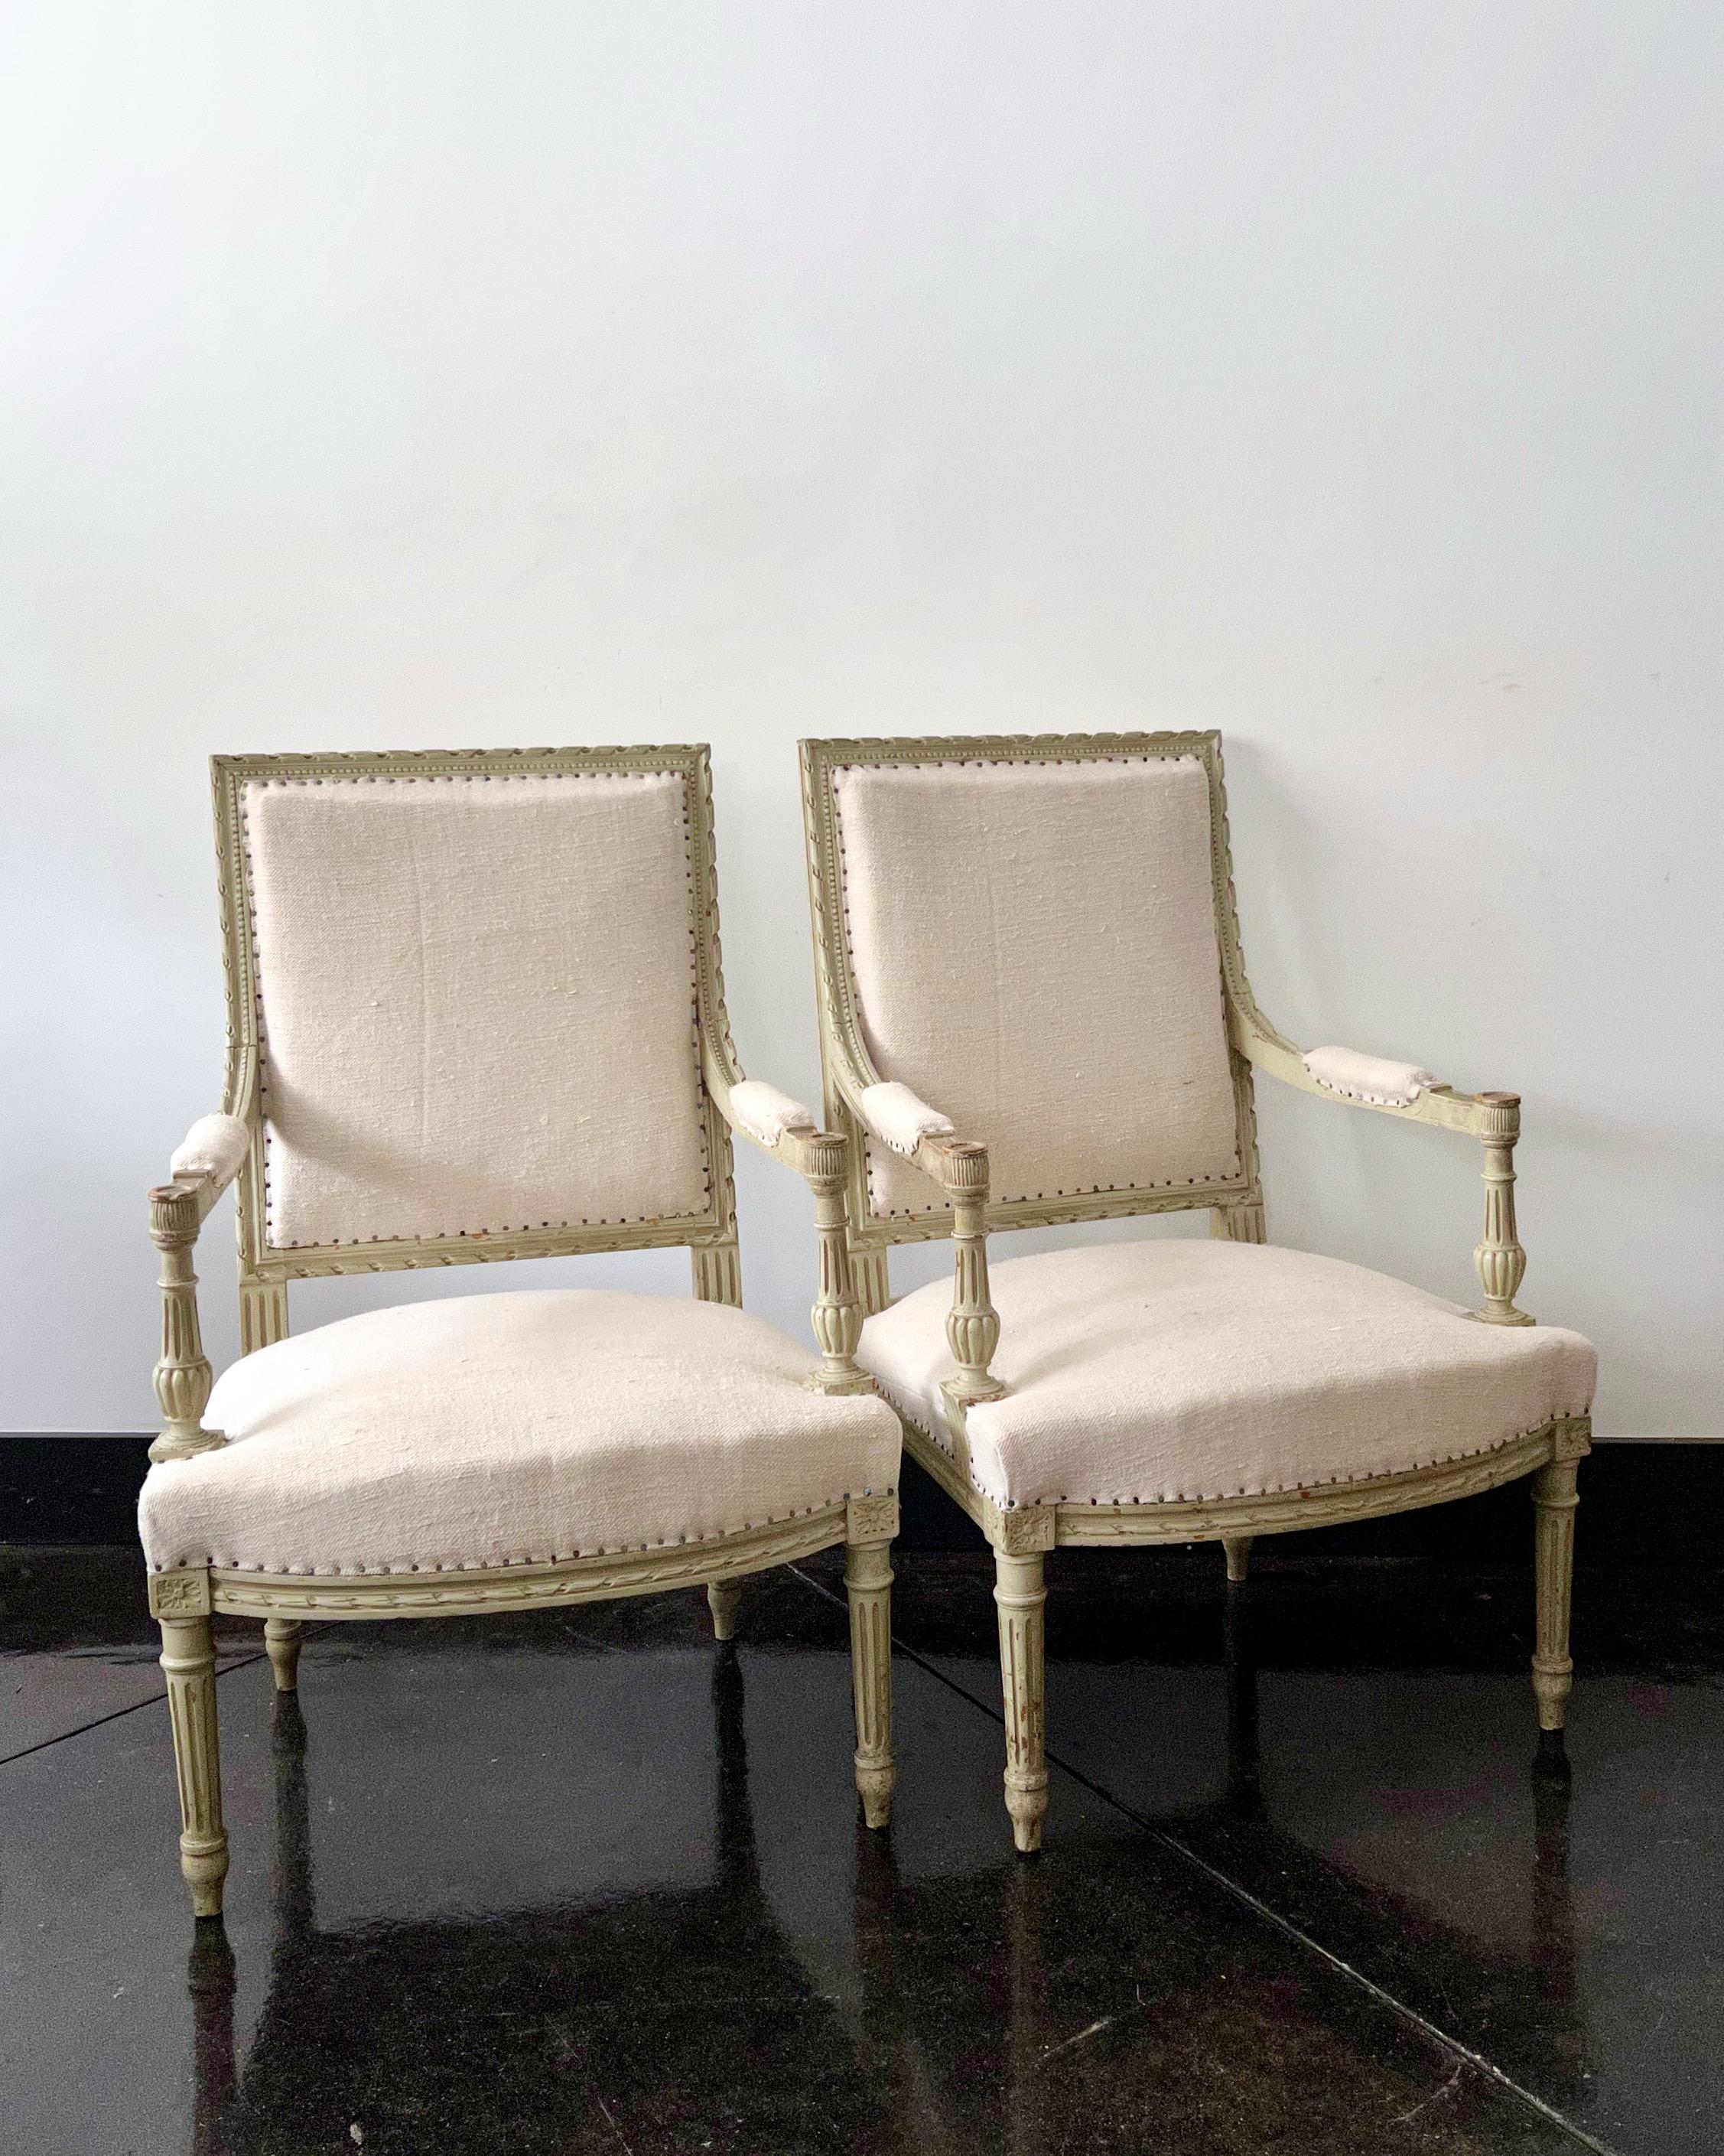 A pair of 19th century French armchairs à la reine with flat back and richly carved armrest with acanthus and rosettes on fluted tapered legs, showing in original worn finish.
Upholstered in raw linen.